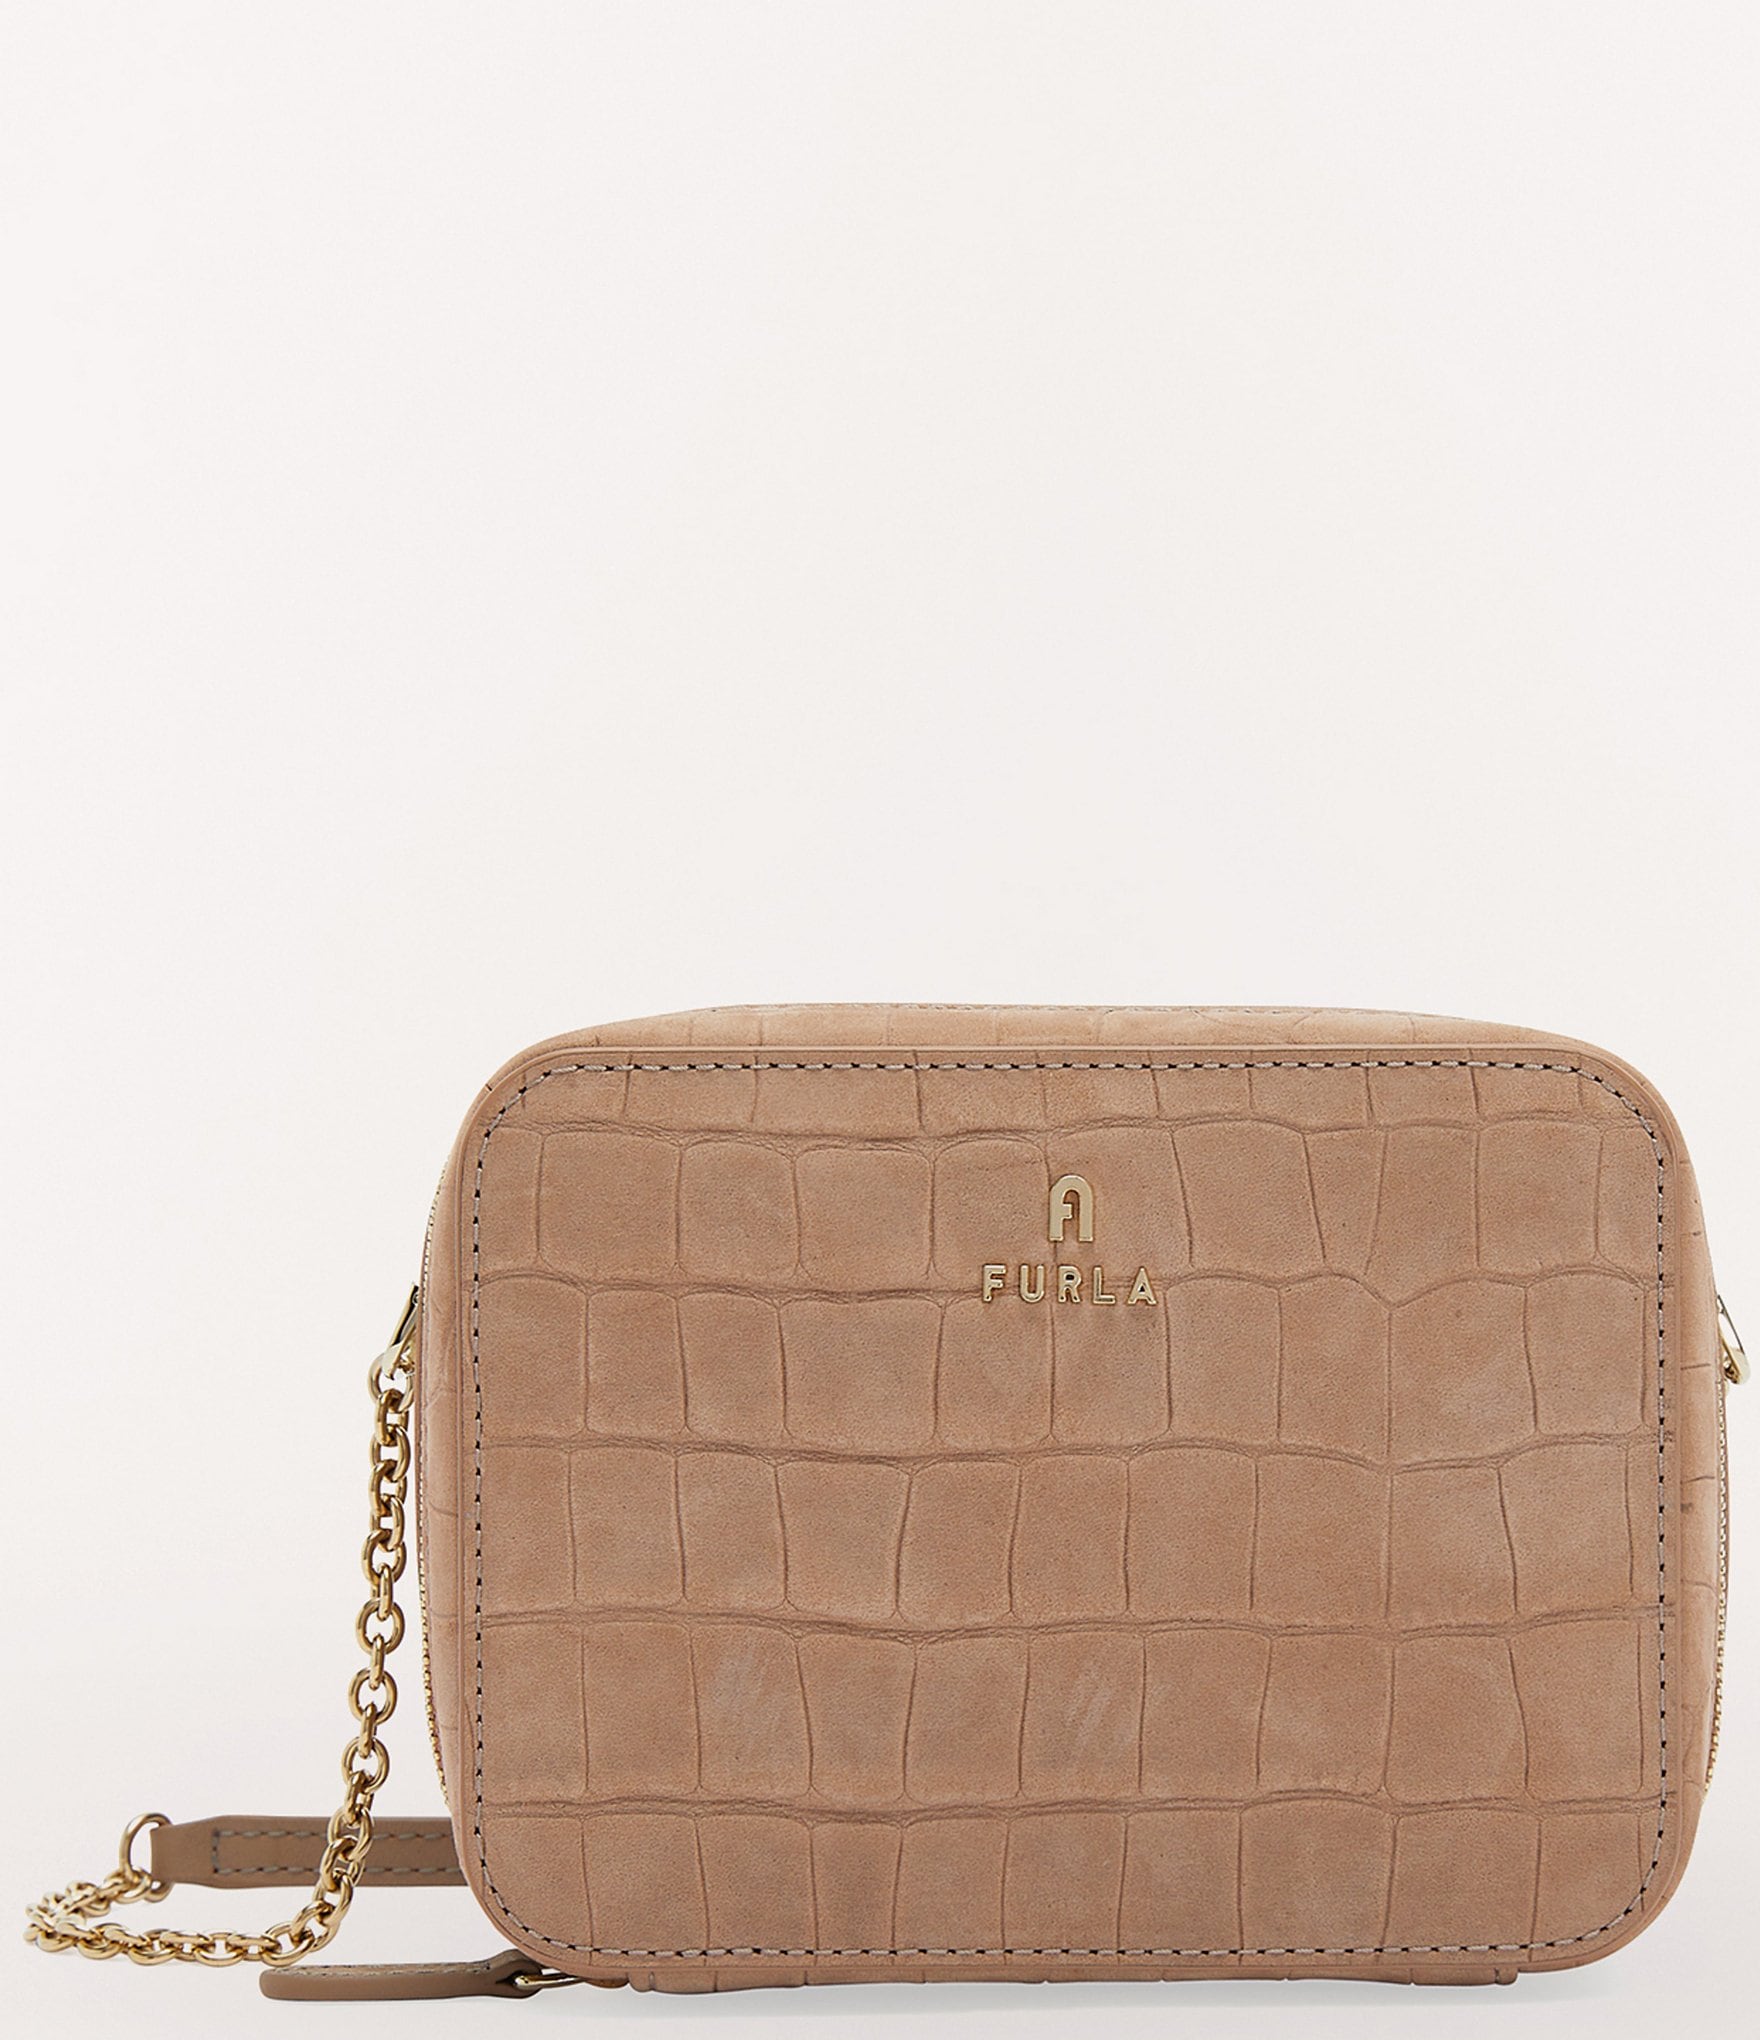 GUESS cross body bag Katey Luxury Satchel Natural / Camelia